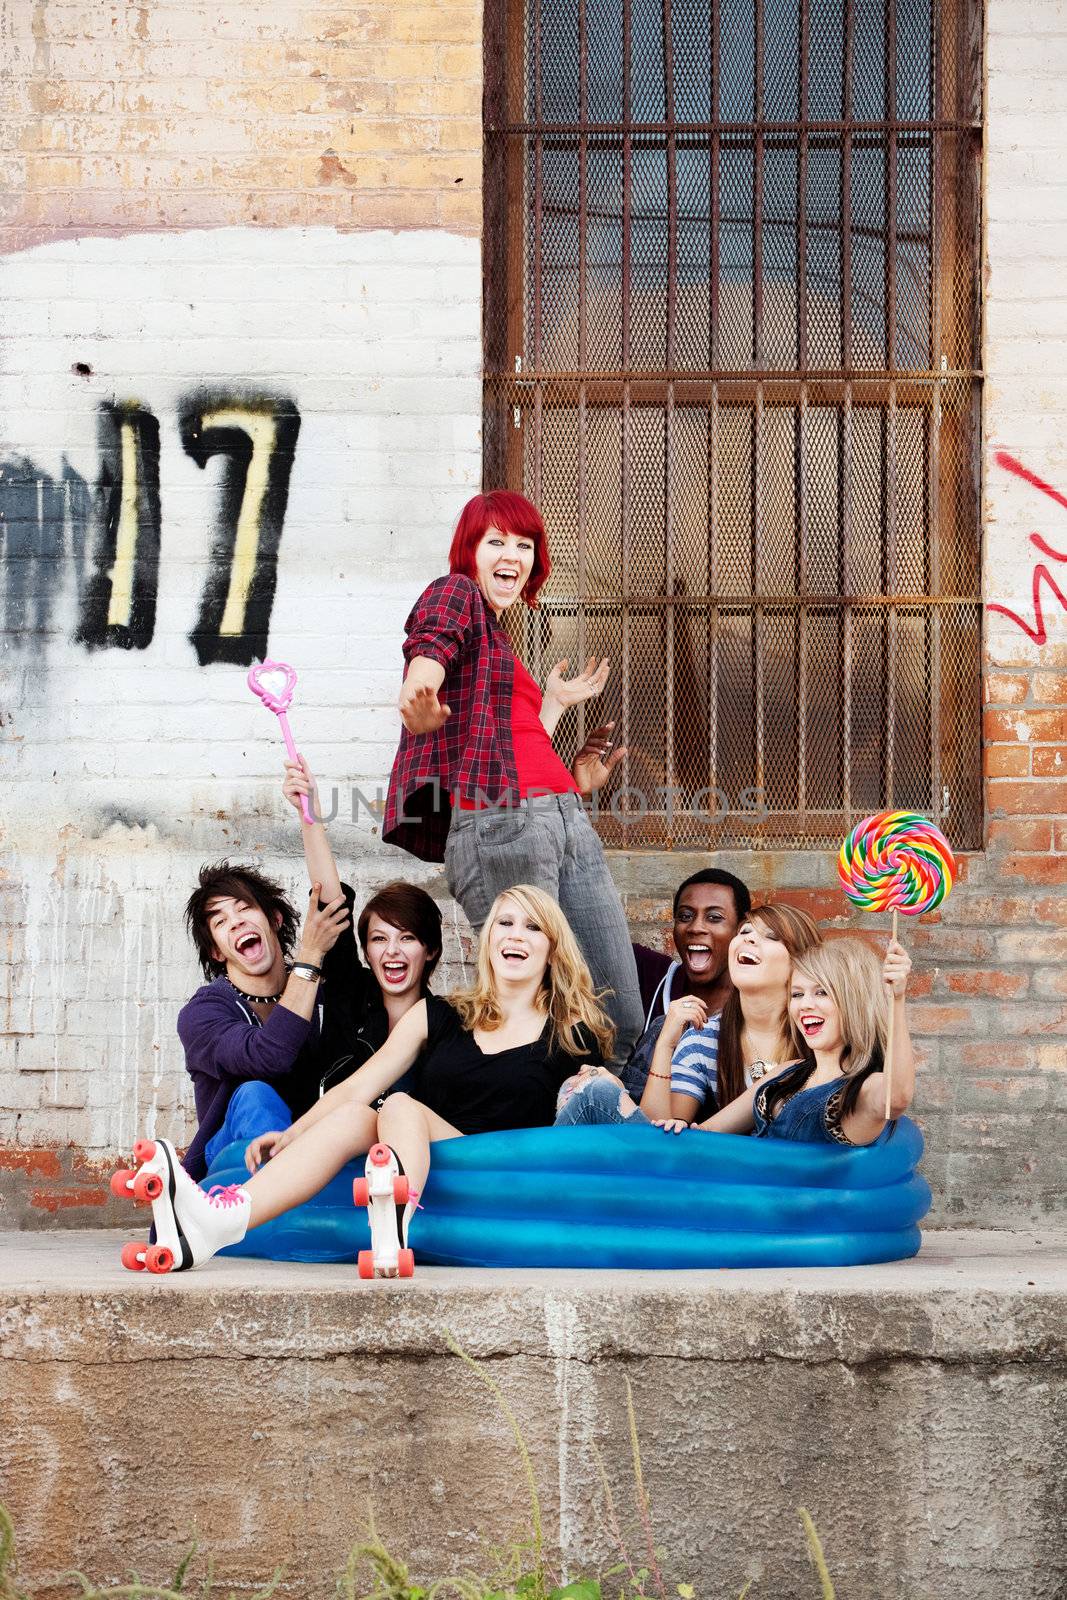 Crazy teen punks sit together in an inflatable pool behind an old warehouse downtown.